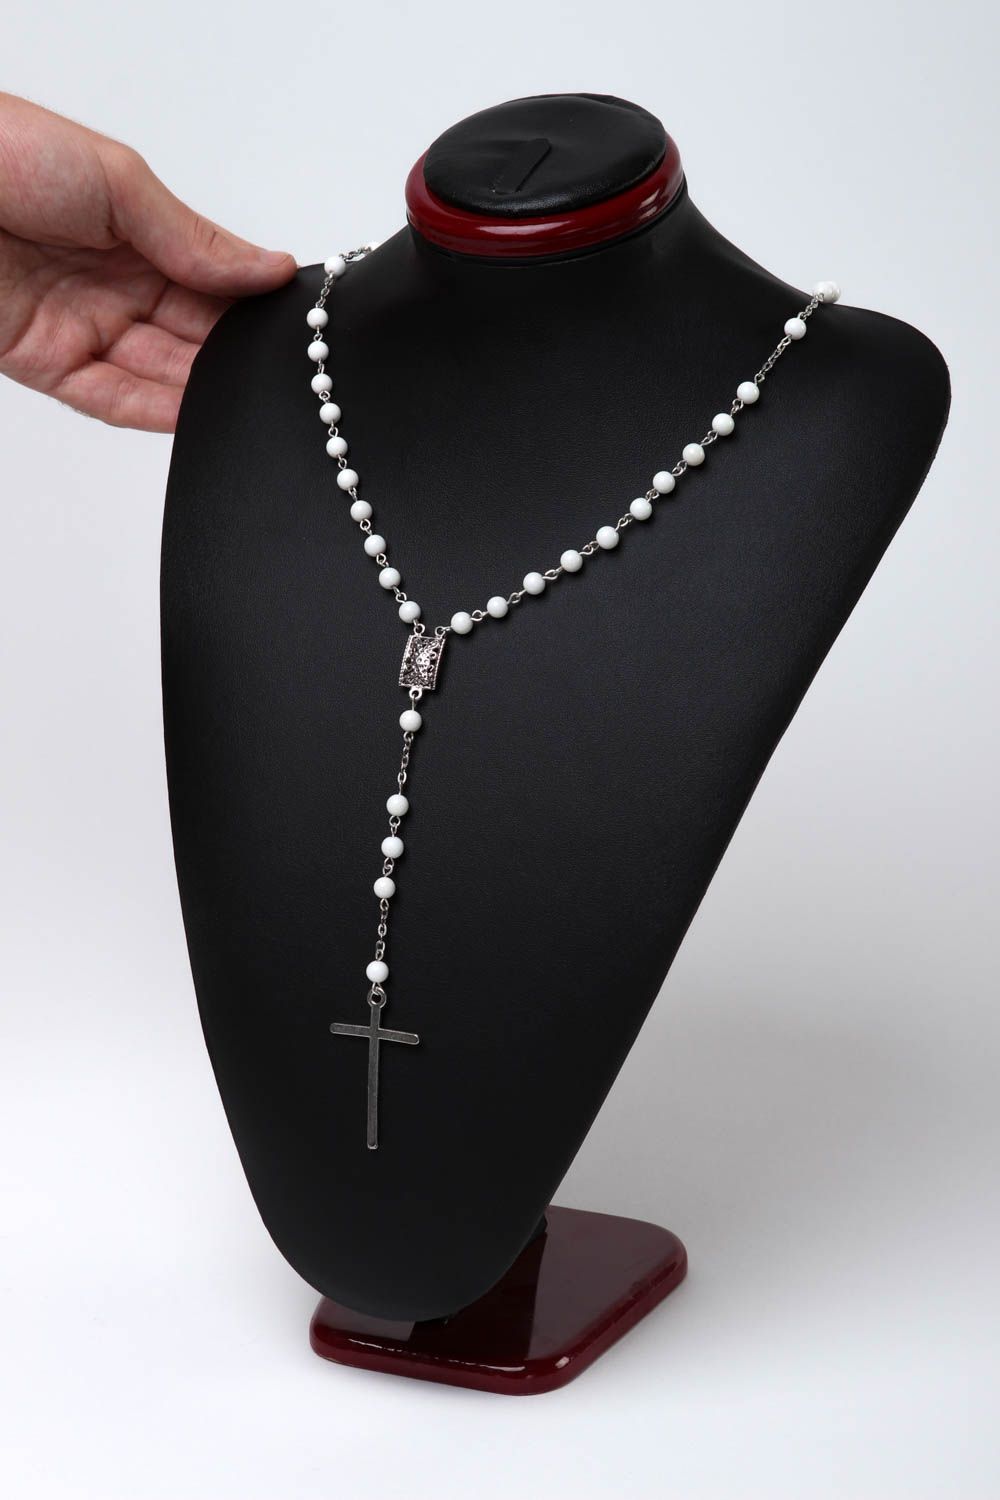 Handmade rosary designer accessory unusual necklace gift ideas rosary with cross photo 5